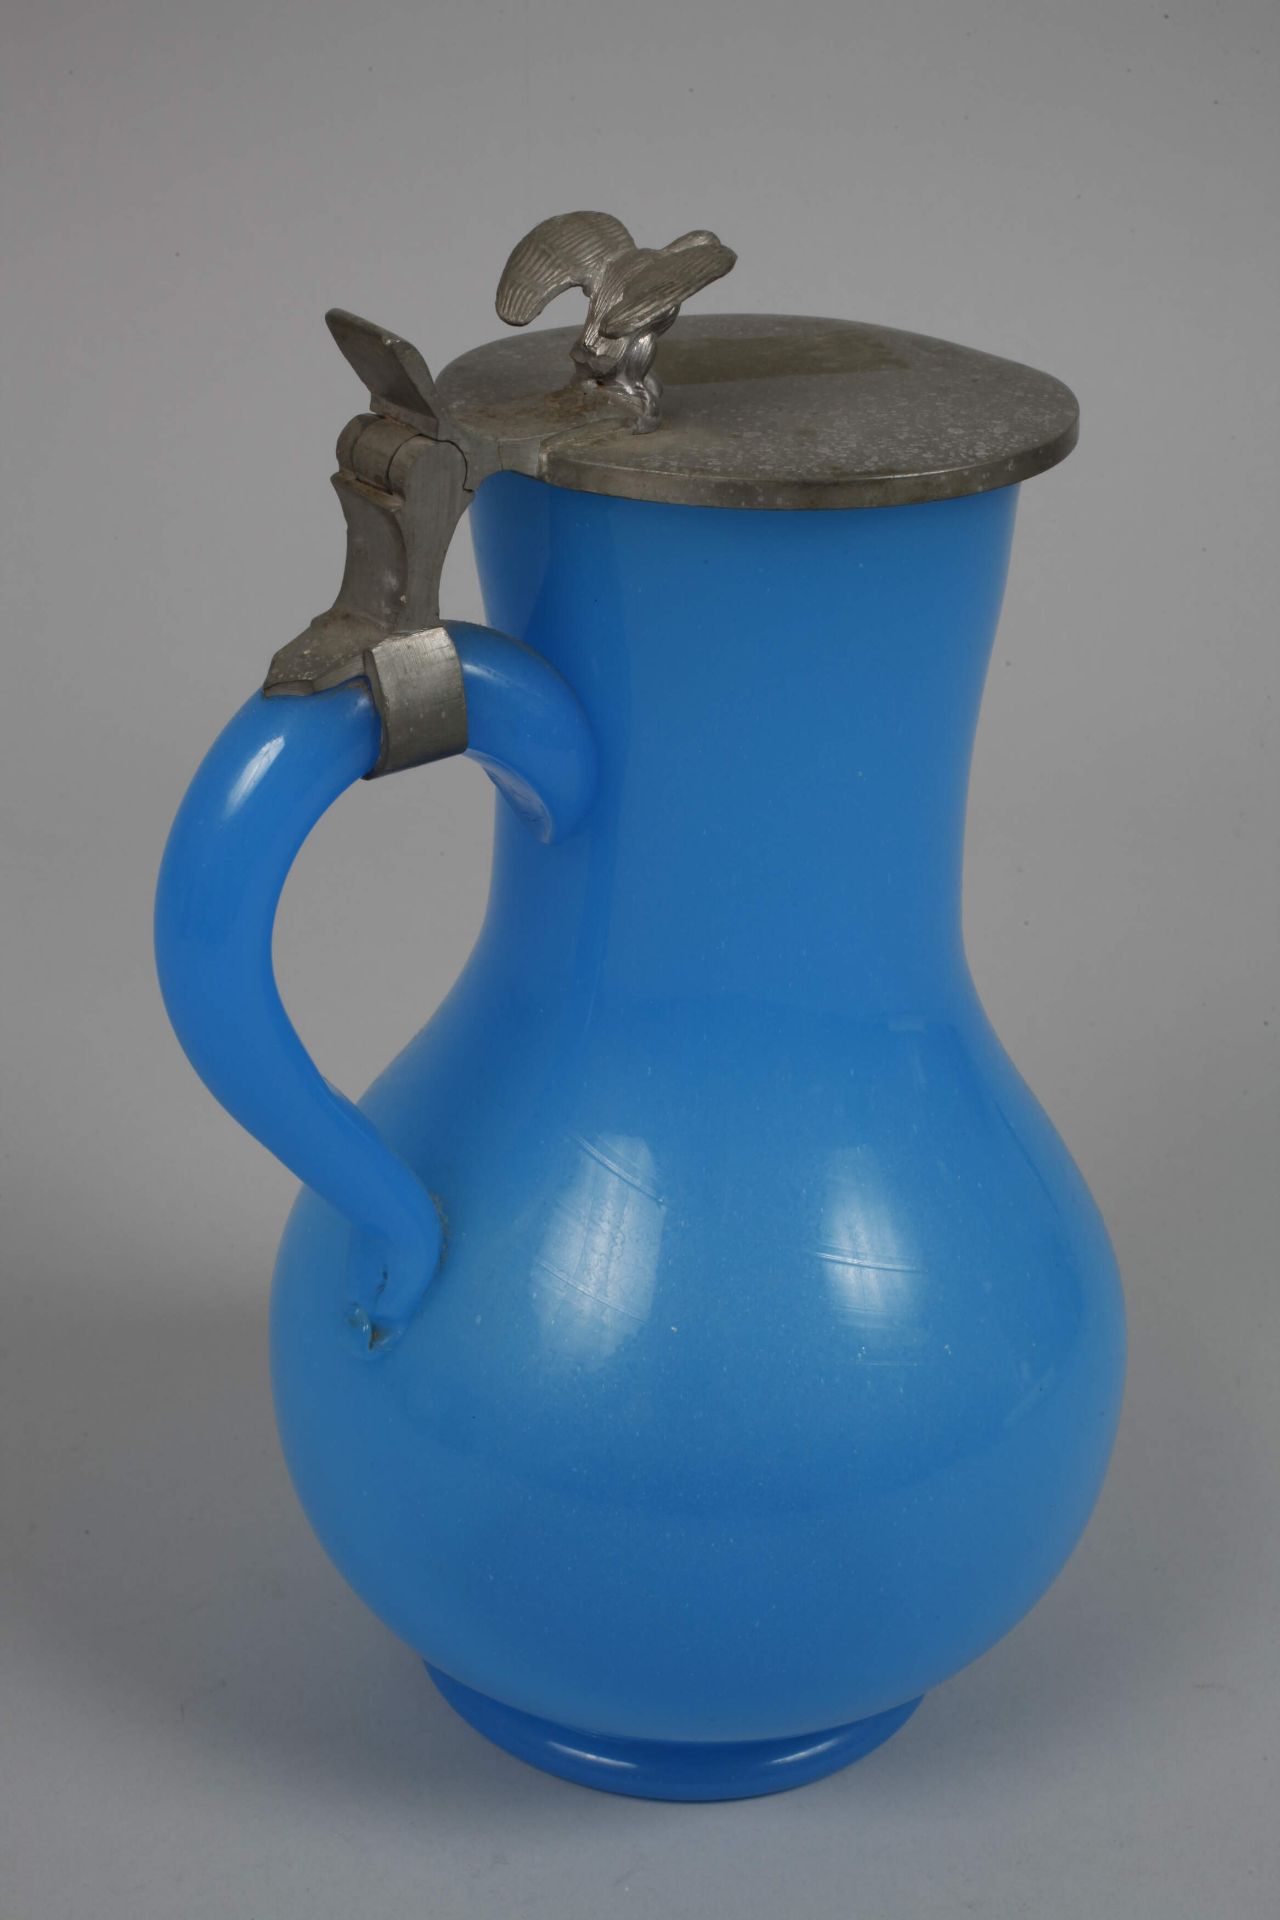 Three decorative jugs with eagle handles - Image 3 of 4